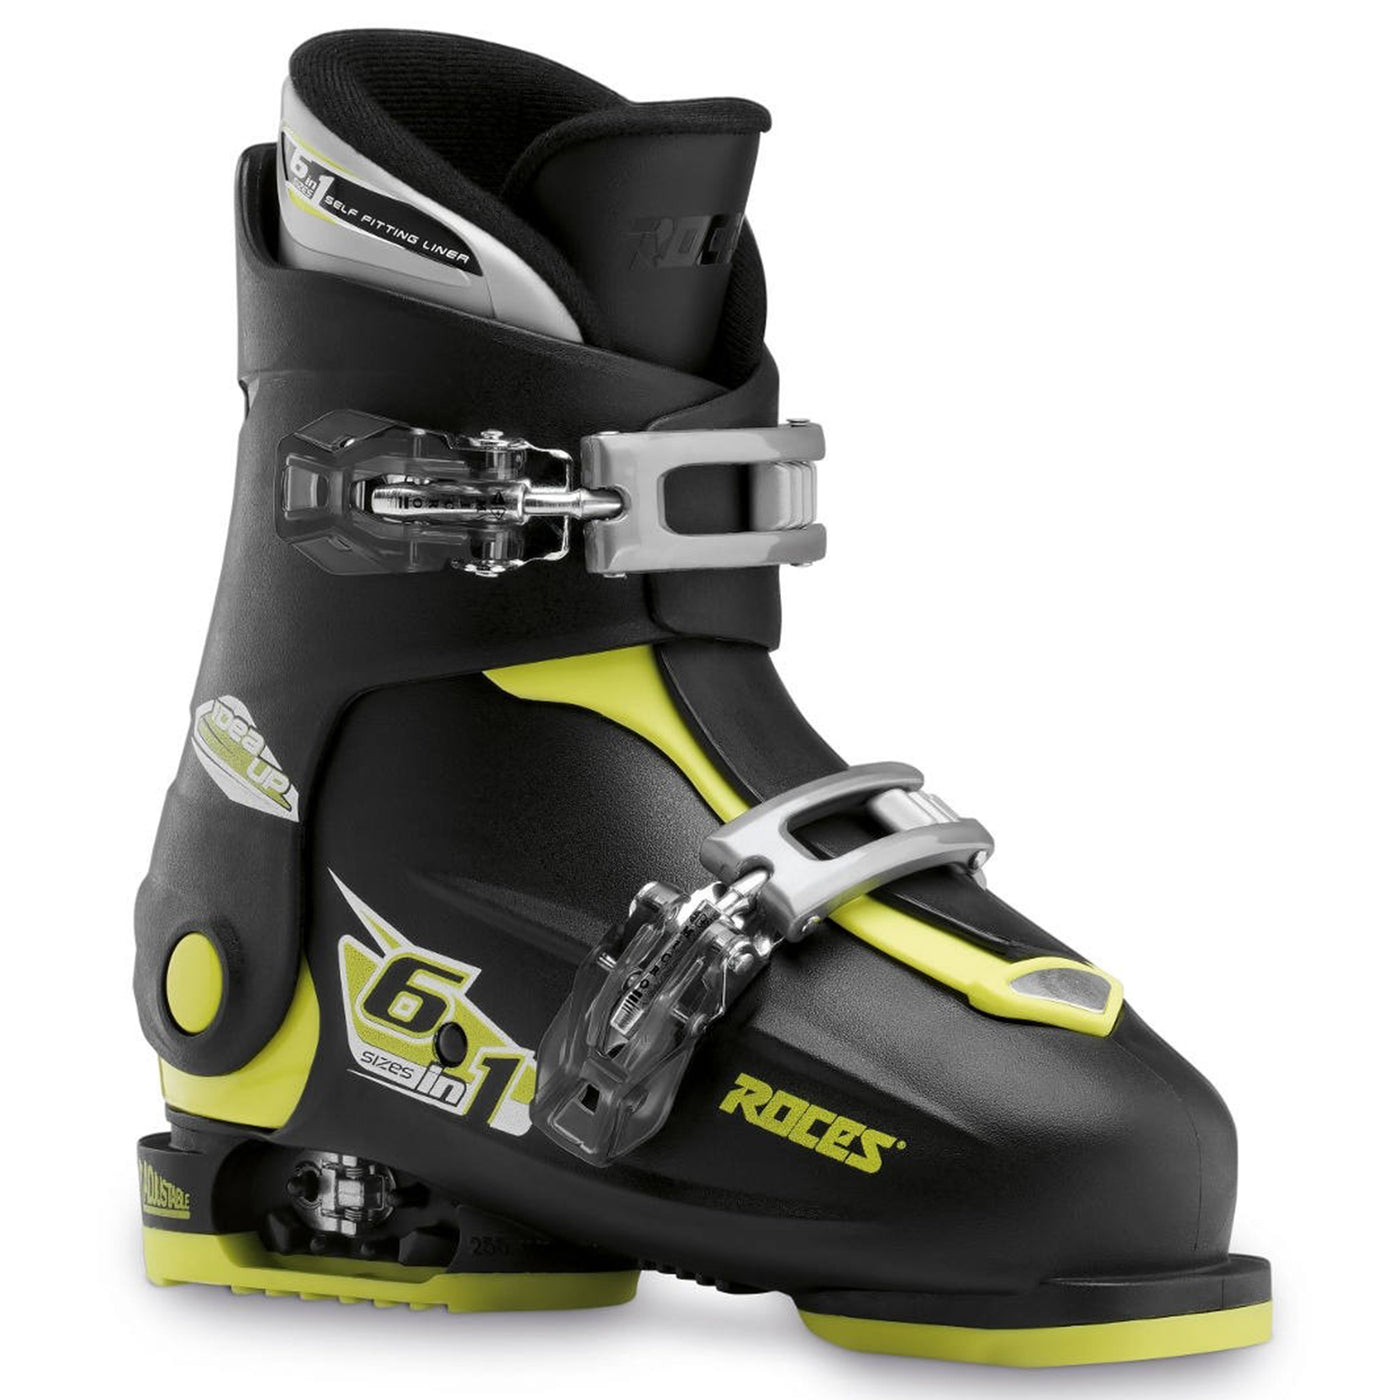 Roces IDEA Up Adjustable Youth Ski Boots | Size 19.0 - 22.0 MP - (OPEN BOX RETURN) SKI BOOTS Roces Black/Lime Green  